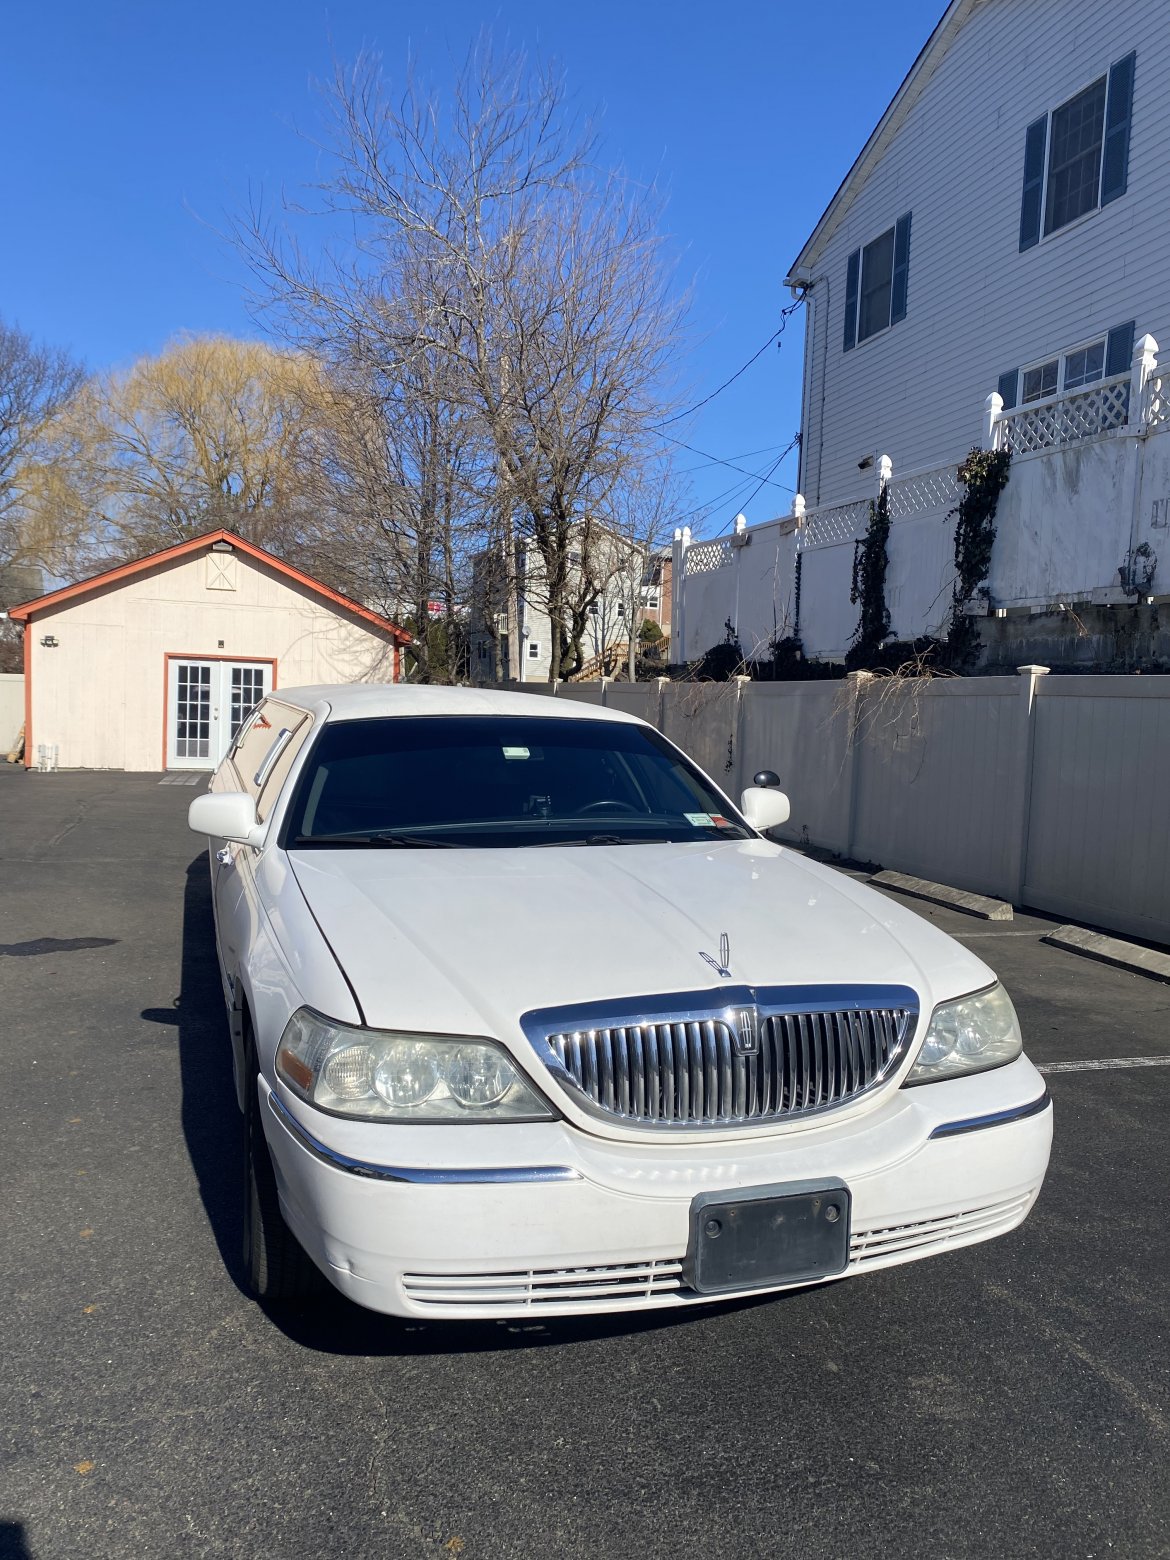 Limousine for sale: 2008 Lincoln Town Car 120&quot; by Krystal